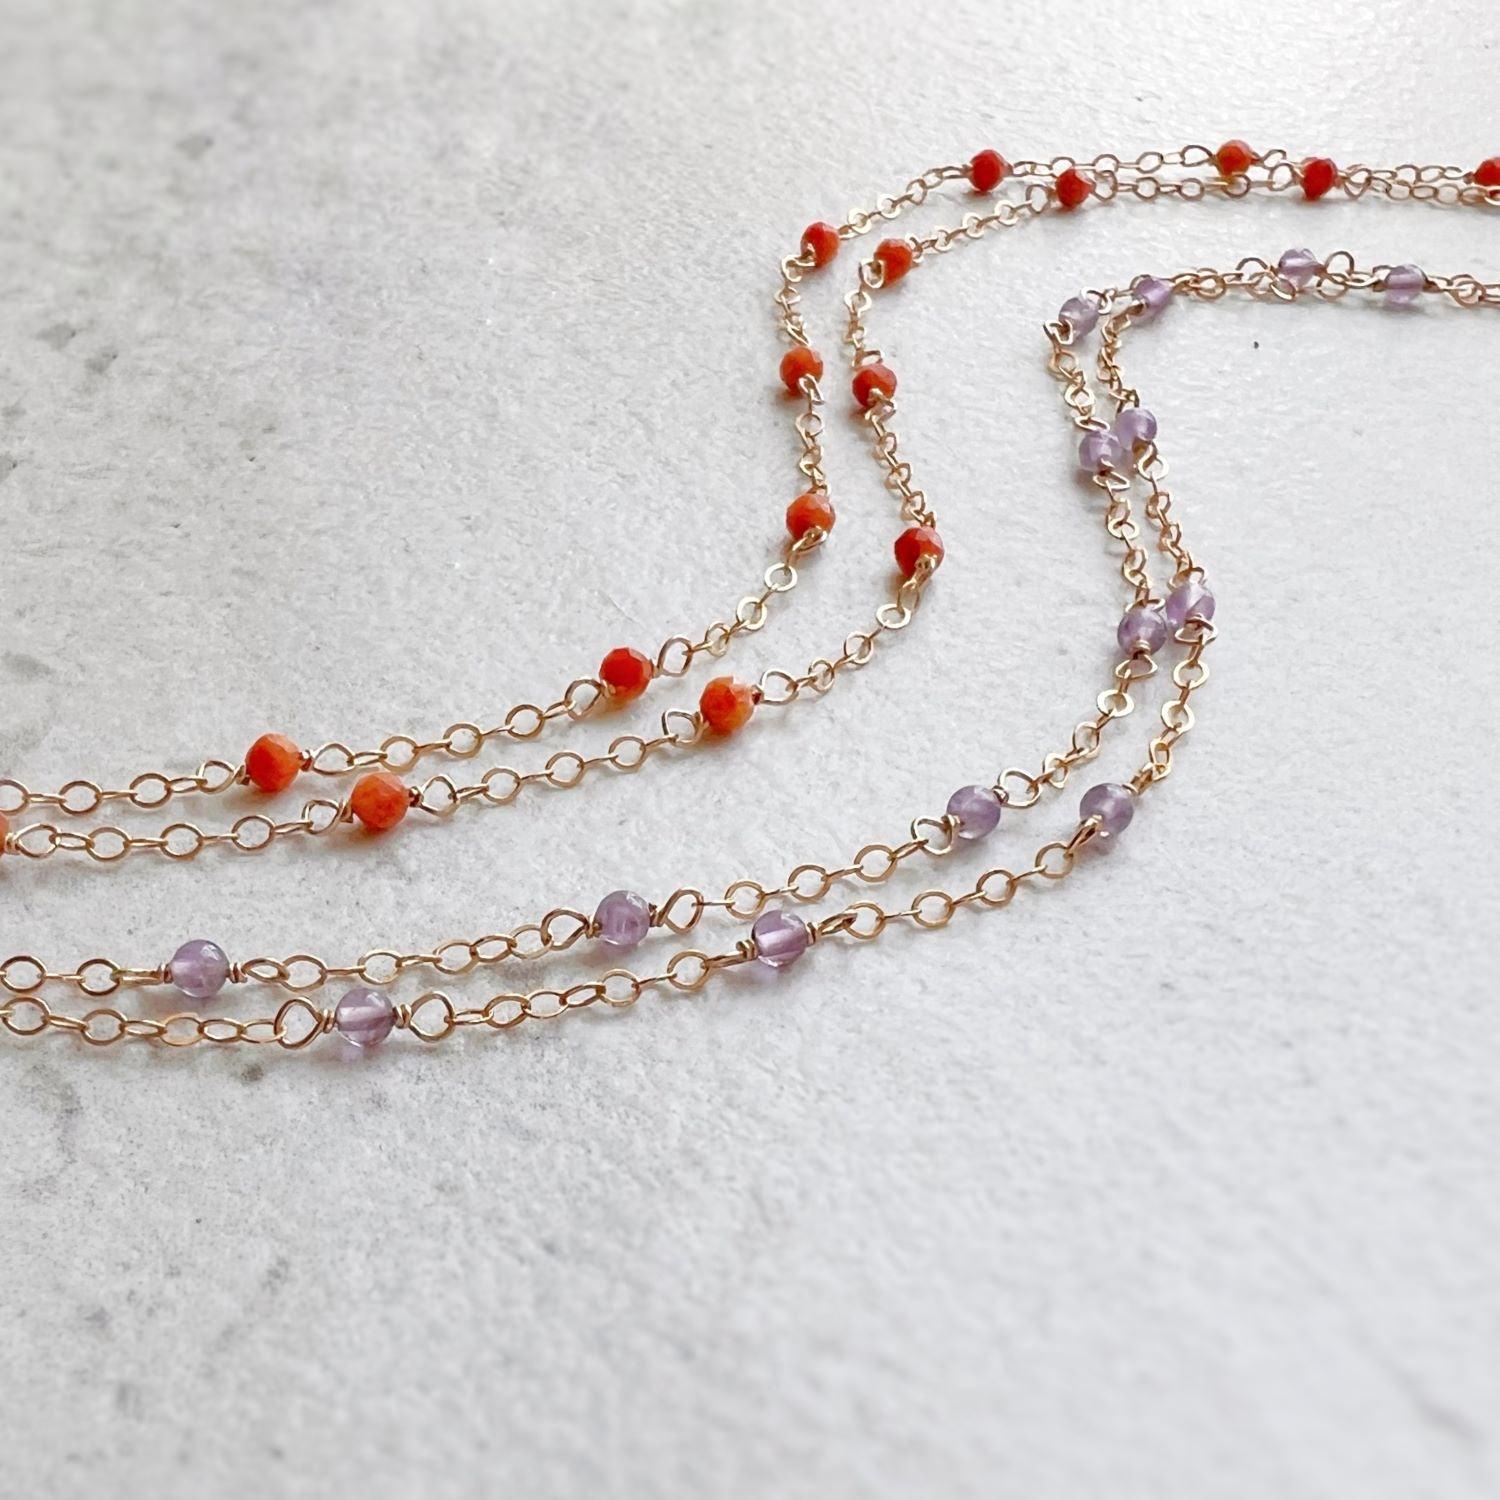 Coral Beads & 14k Gold Layered Anklet - The Smart Minimalist